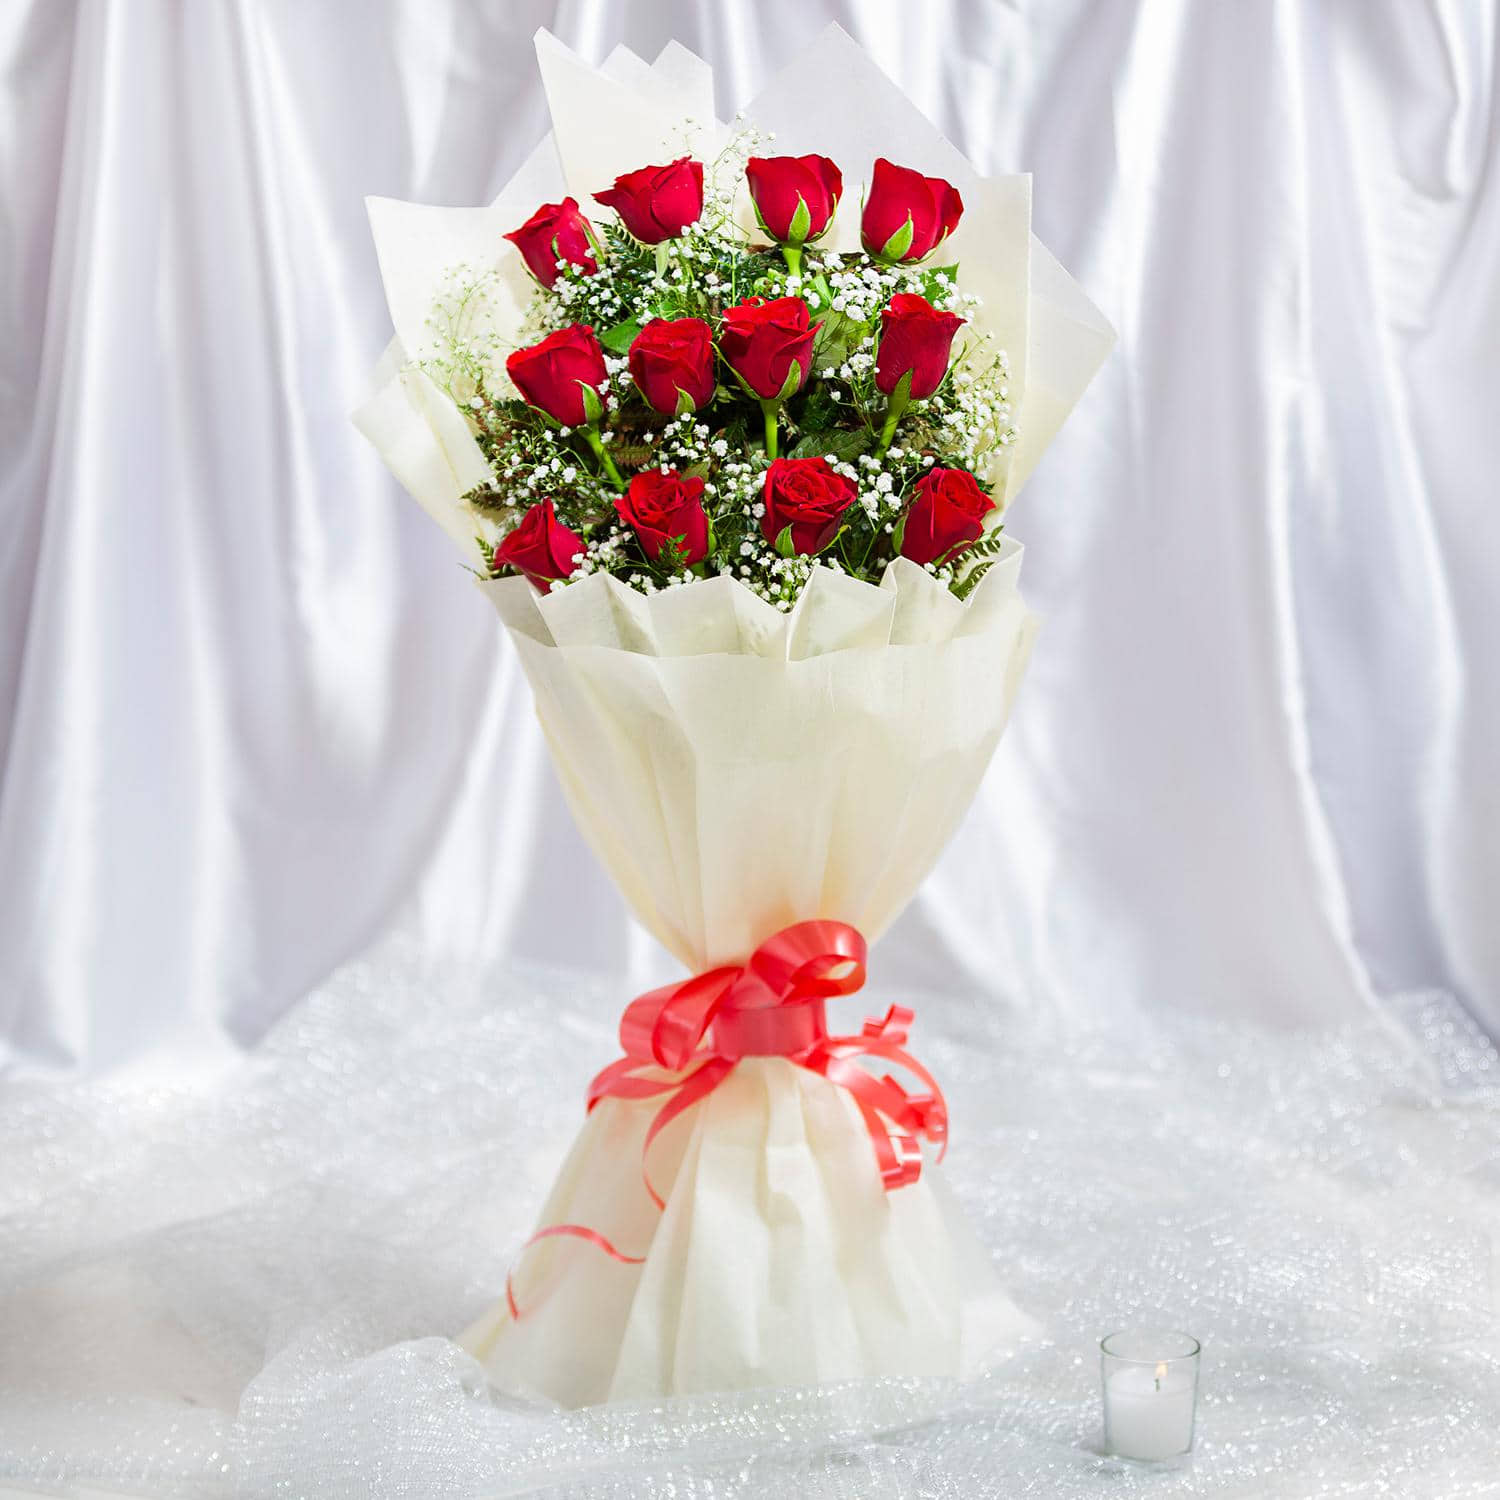 Flower Delivery Lucknow in 30 Mins, Send Flowers Online Lucknow - IGP